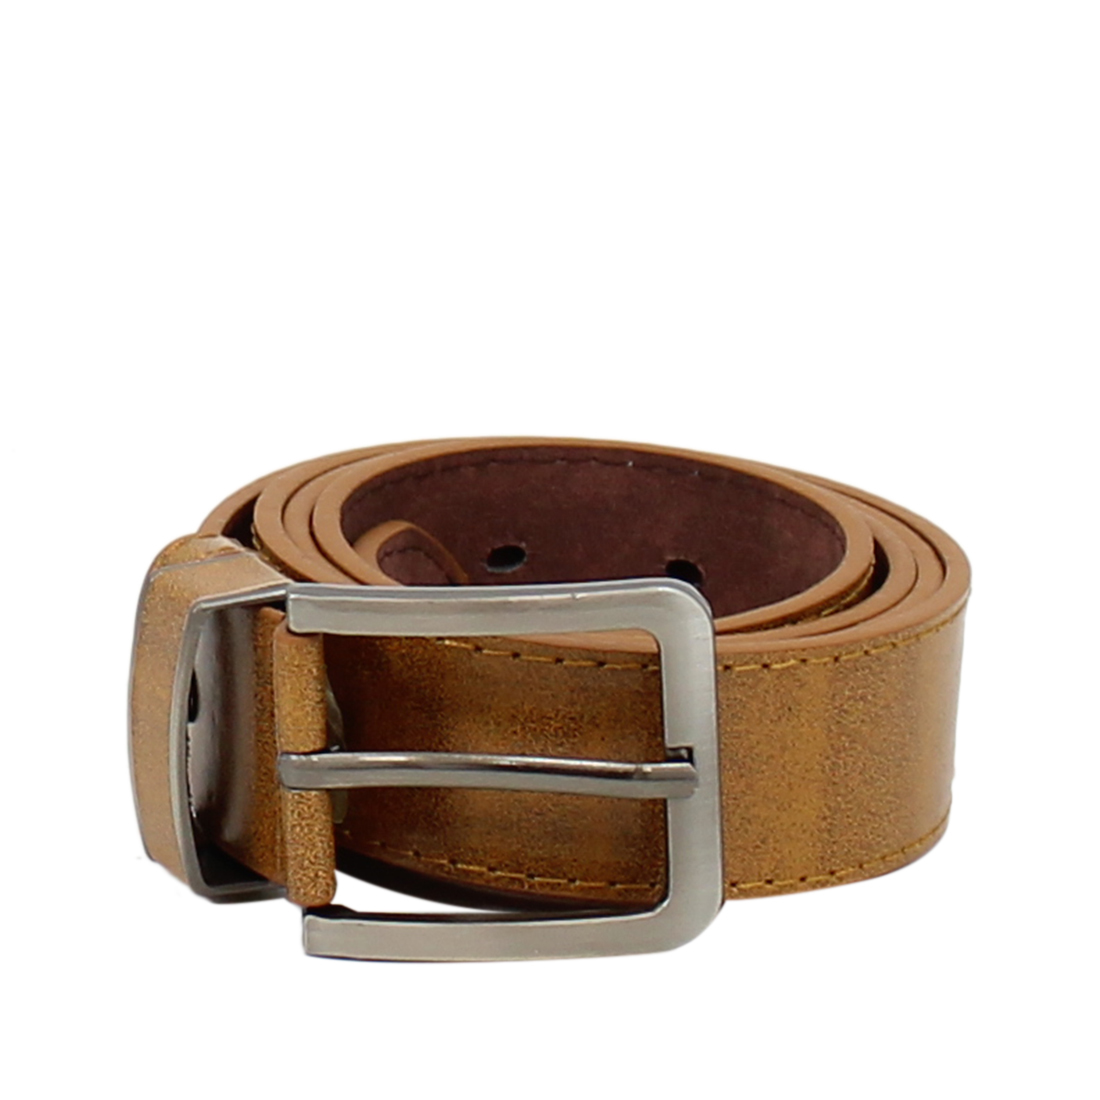 Plain with big square buckle